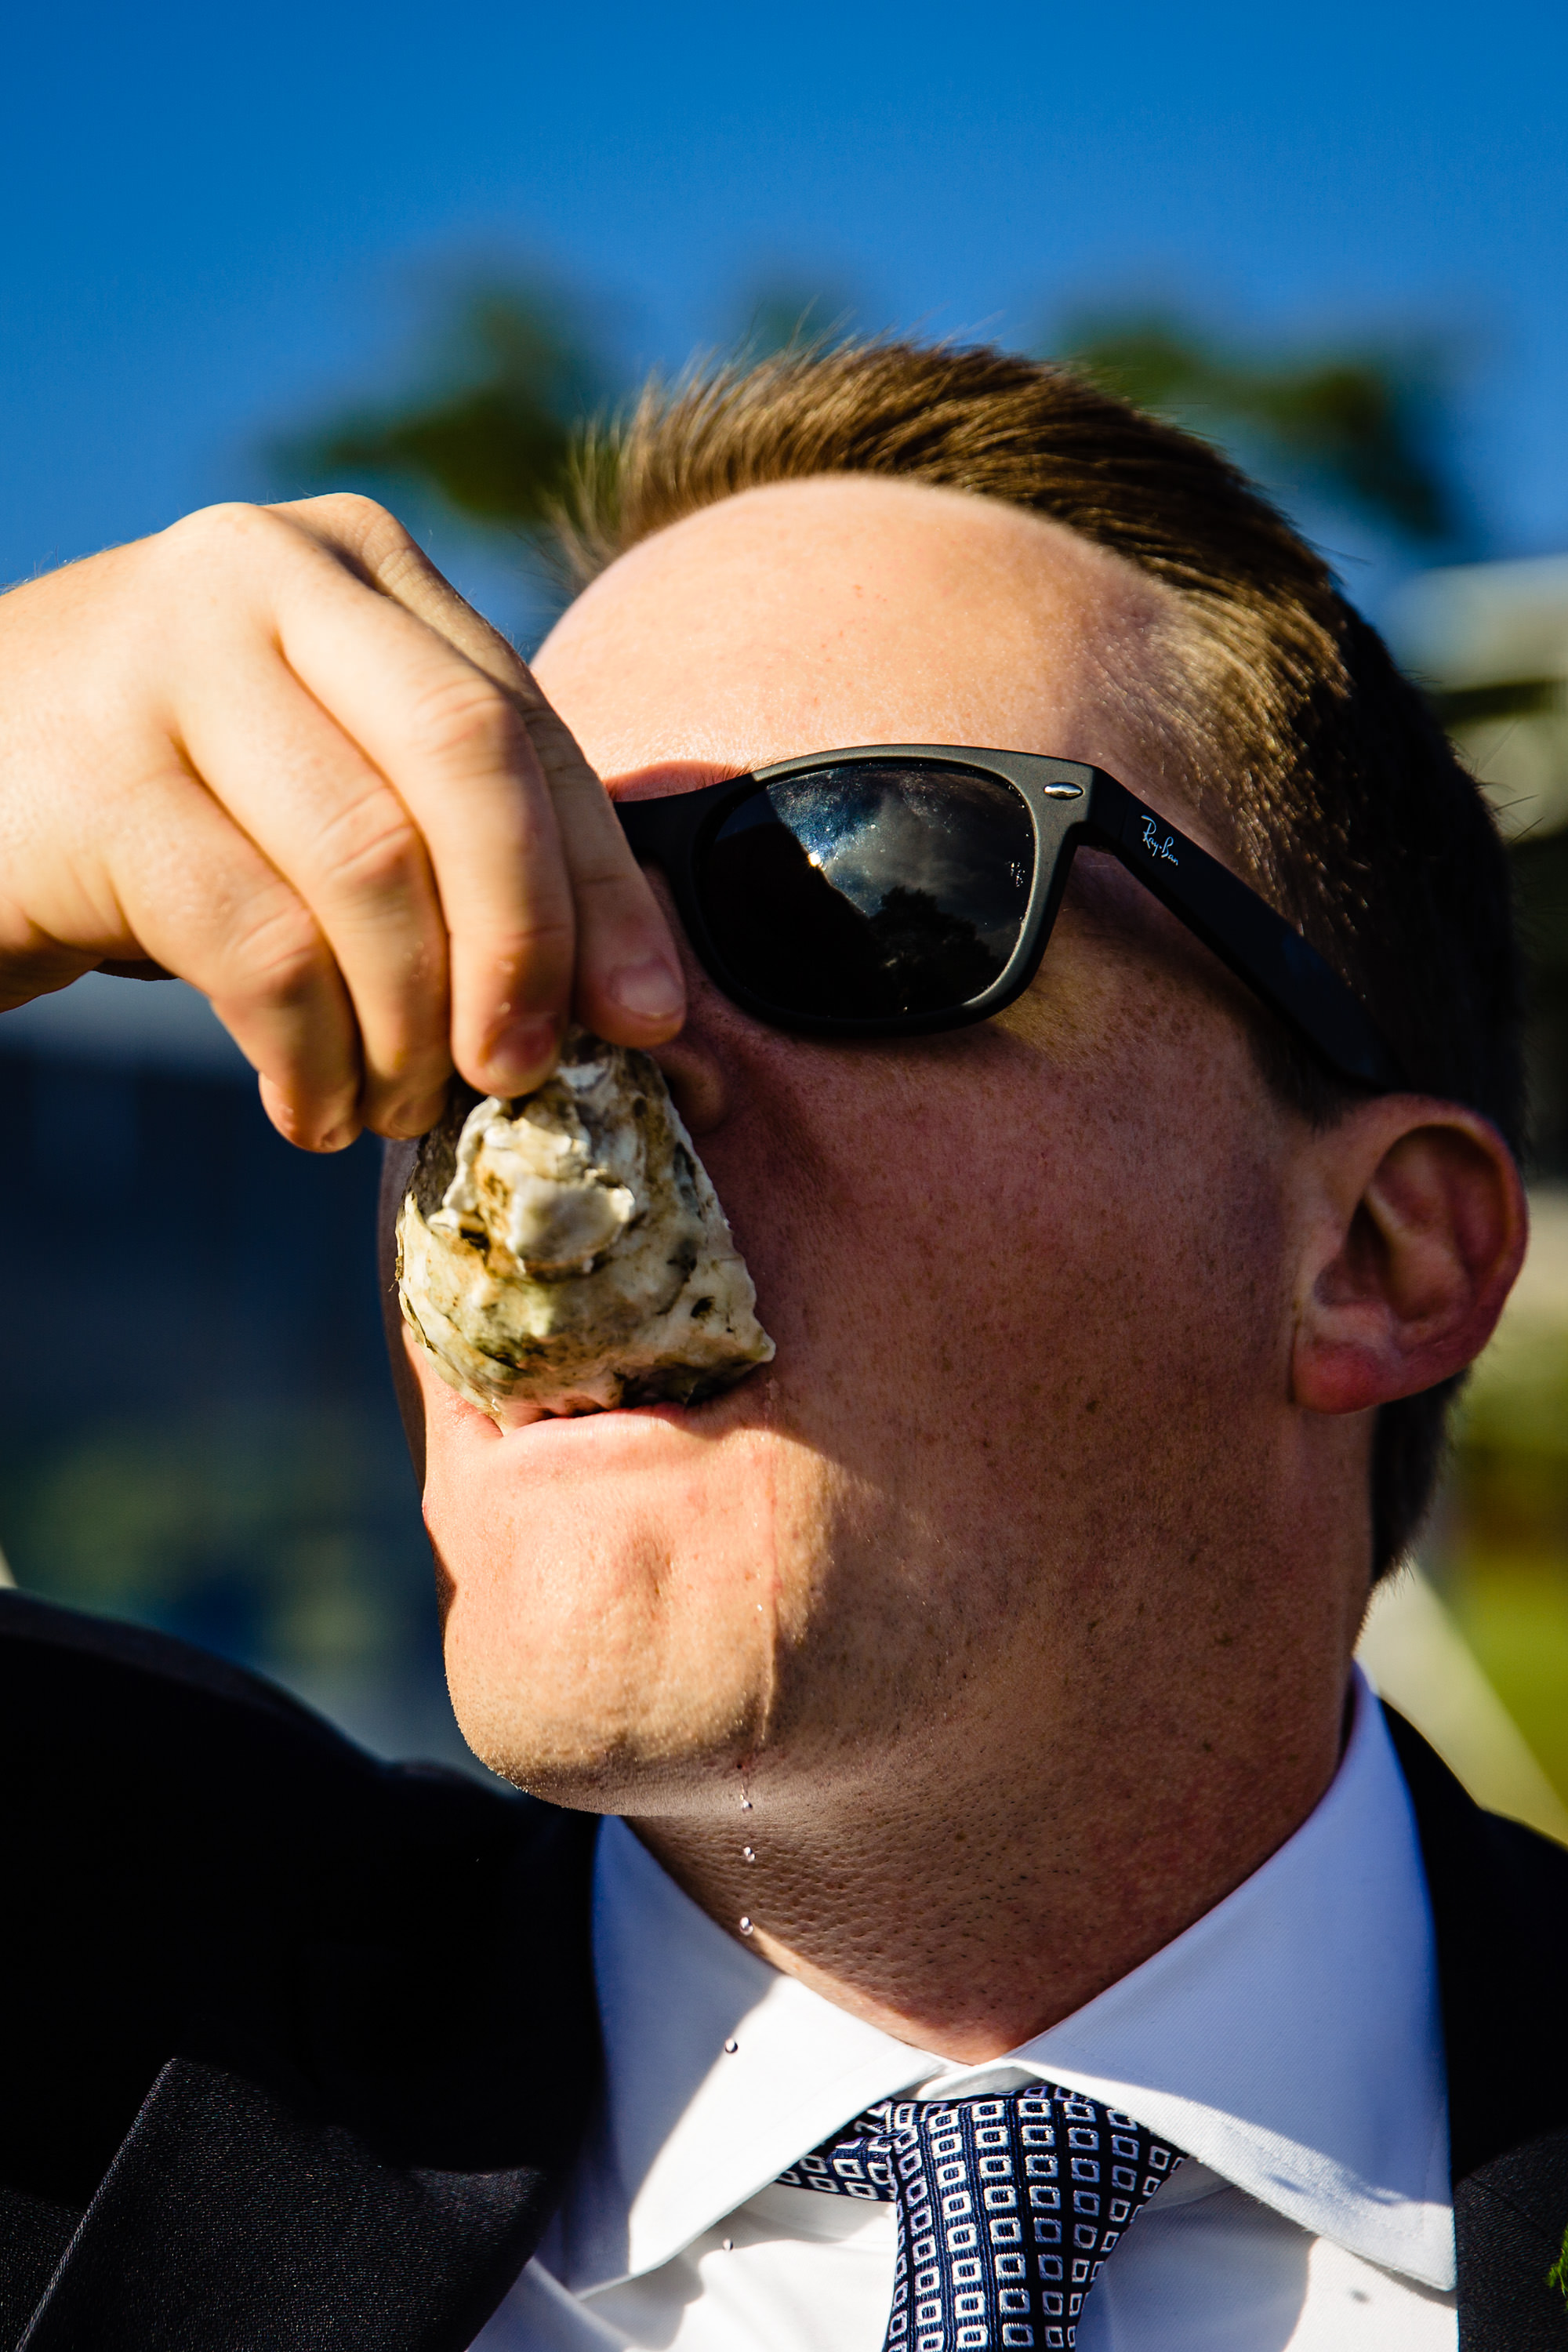 A guest eats an oyster and juice drips down his chin at a Maine wedding.